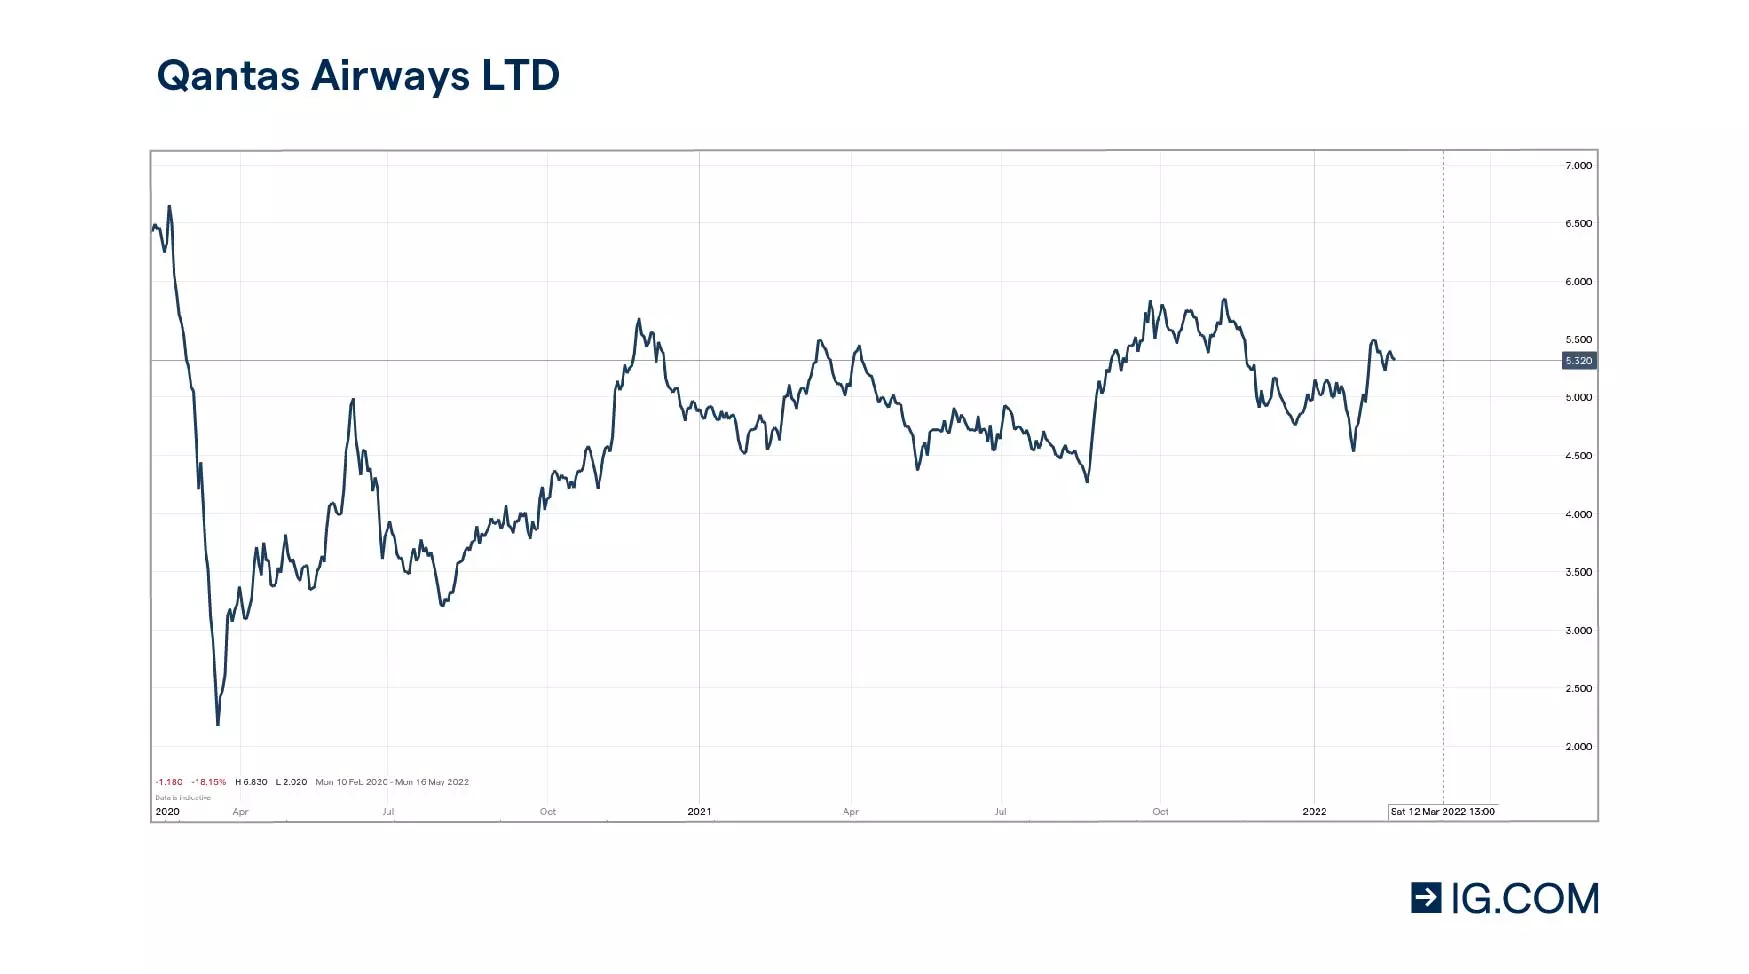 Qantas Airways price chart showing the share price drop from $6.90 to $2 in the first few months of the Covid-19 pandemic. The stock has since made a steady recovery to $5.40 in Q1 FY22